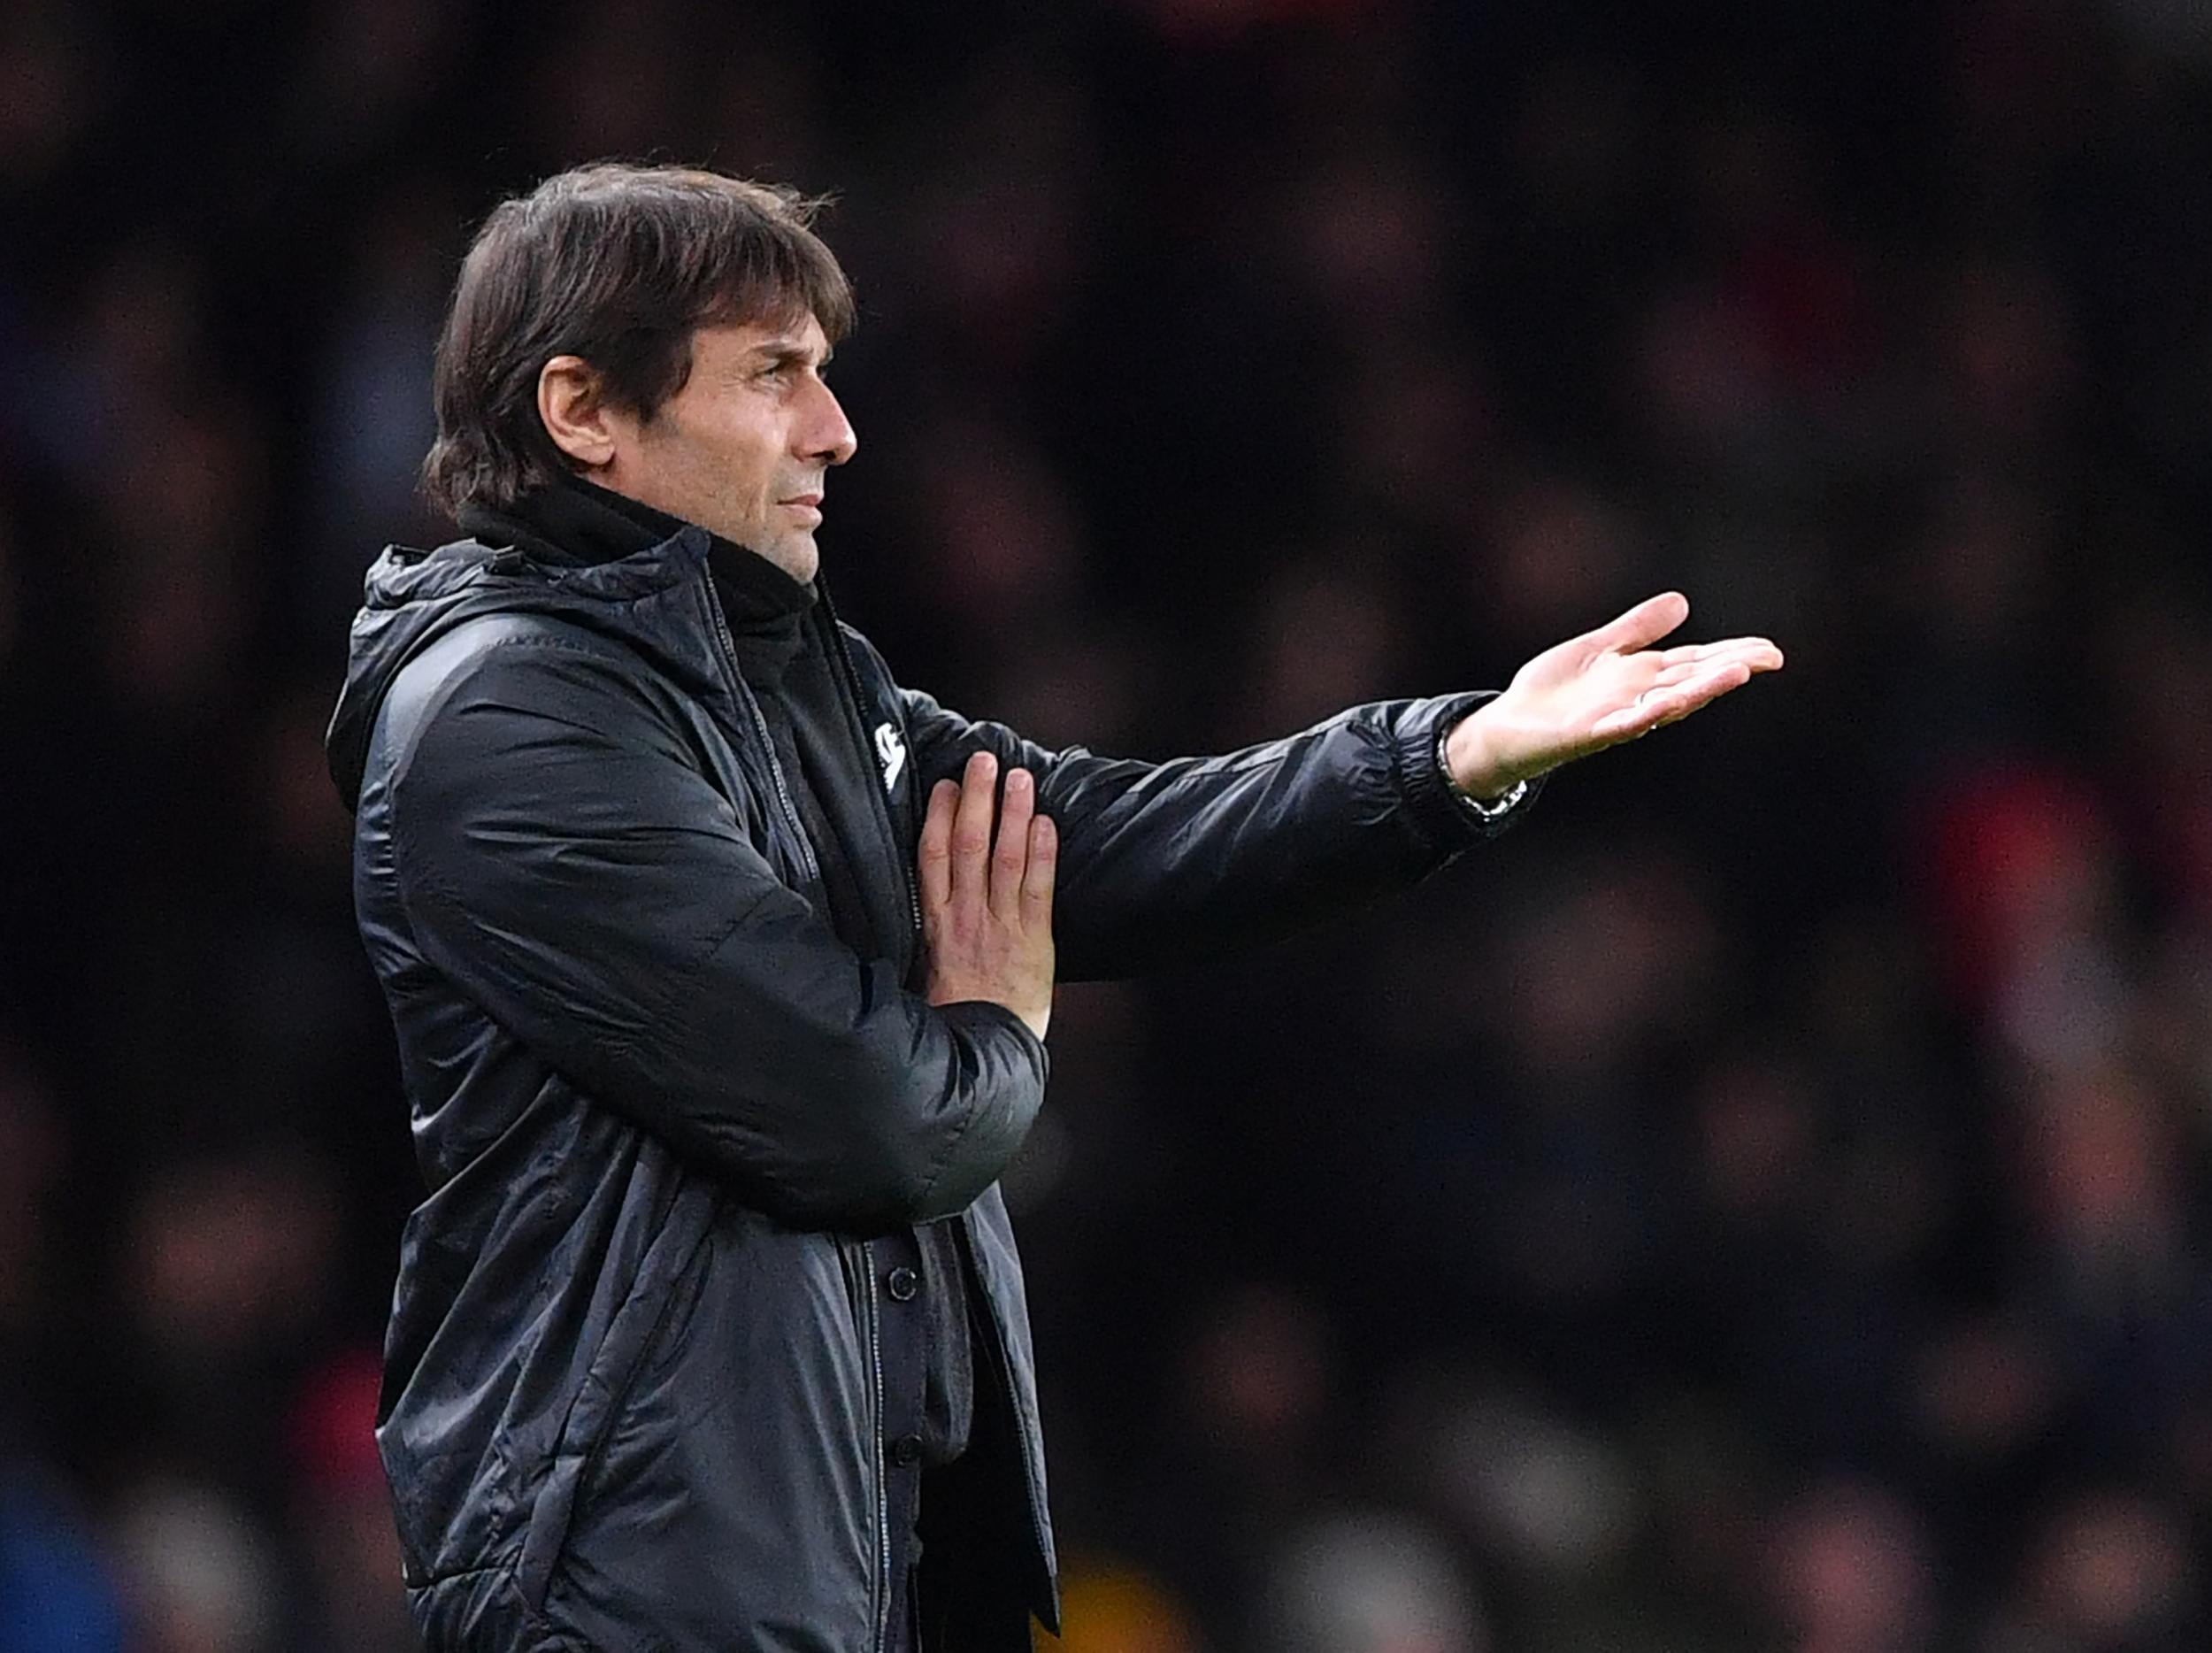 Antonio Conte bemoans that he has little influence over transfers at Chelsea